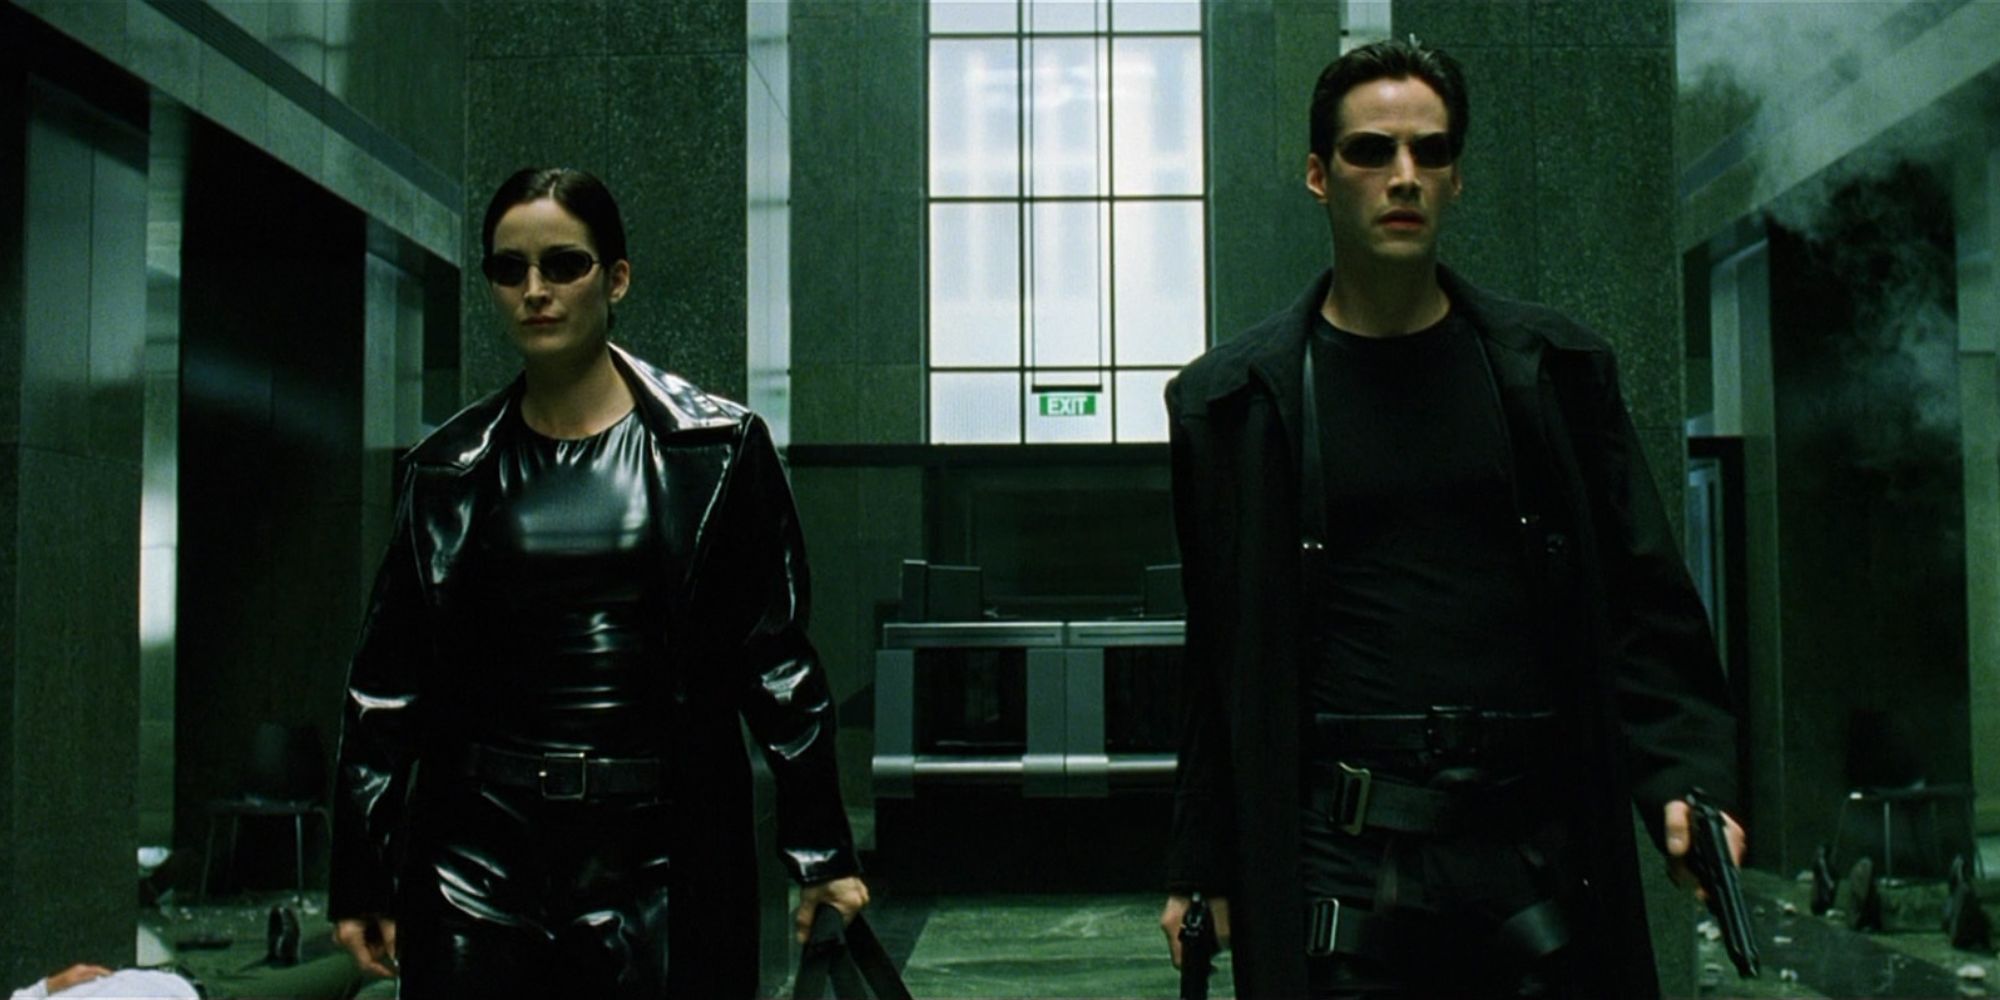 Trinity and Neo in The Matrix